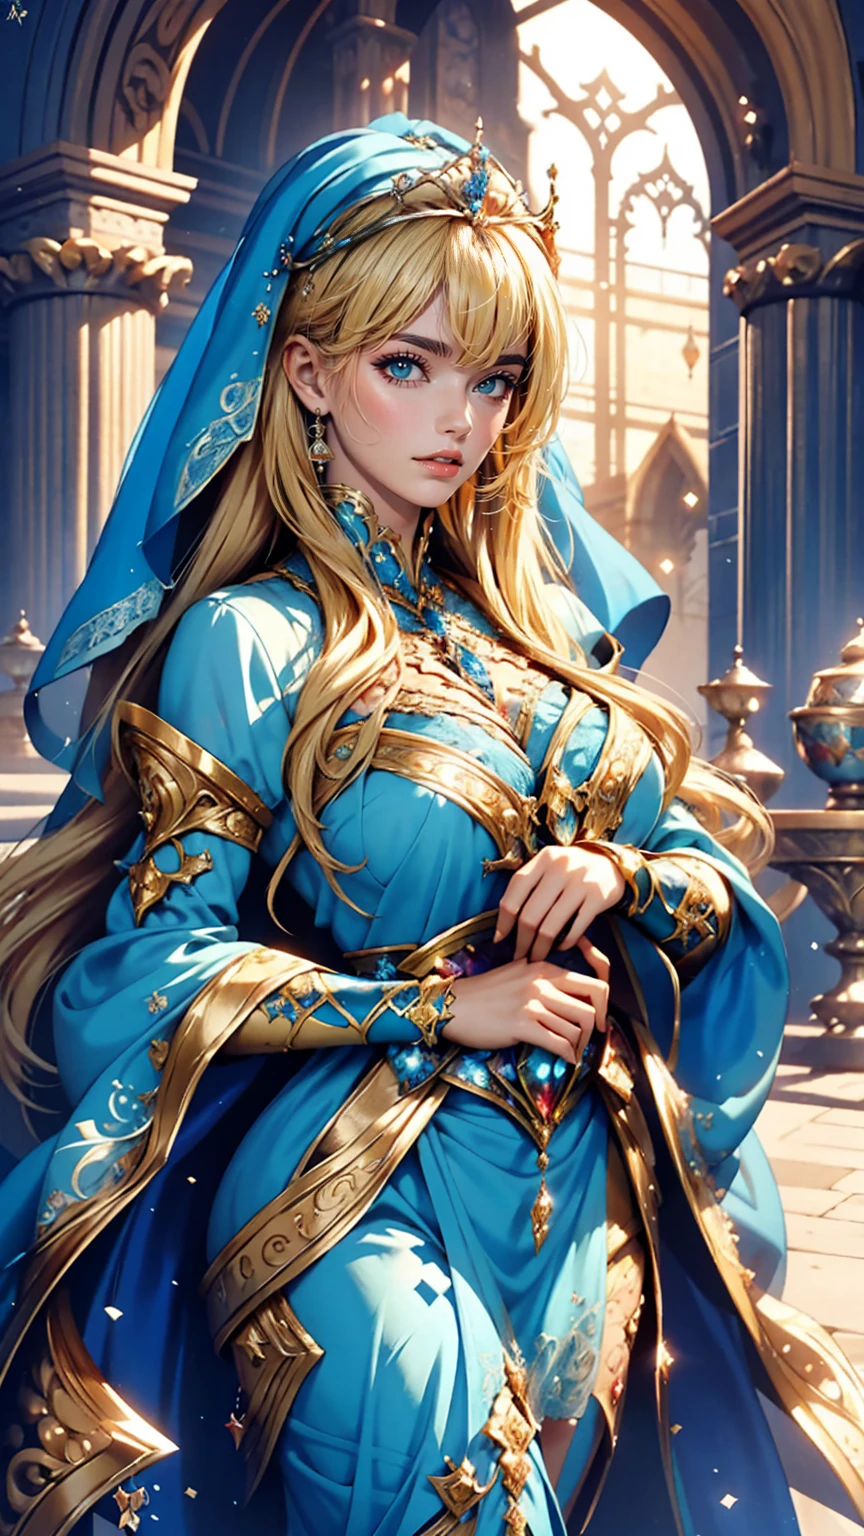 Wearing a blue dress and a veil、Blonde woman with a veil on her head, Beautiful fantasy maiden, Detailed fantasy art, Beautiful fantasy art, Blonde Princess, artgerm の artstation pixiv, Beautiful maiden, ((Beautiful Fantasy Empress)), 2. 5d cgi anime fantasy artwork, Fantasy art style, Detailed digital anime art, Fantasy style art